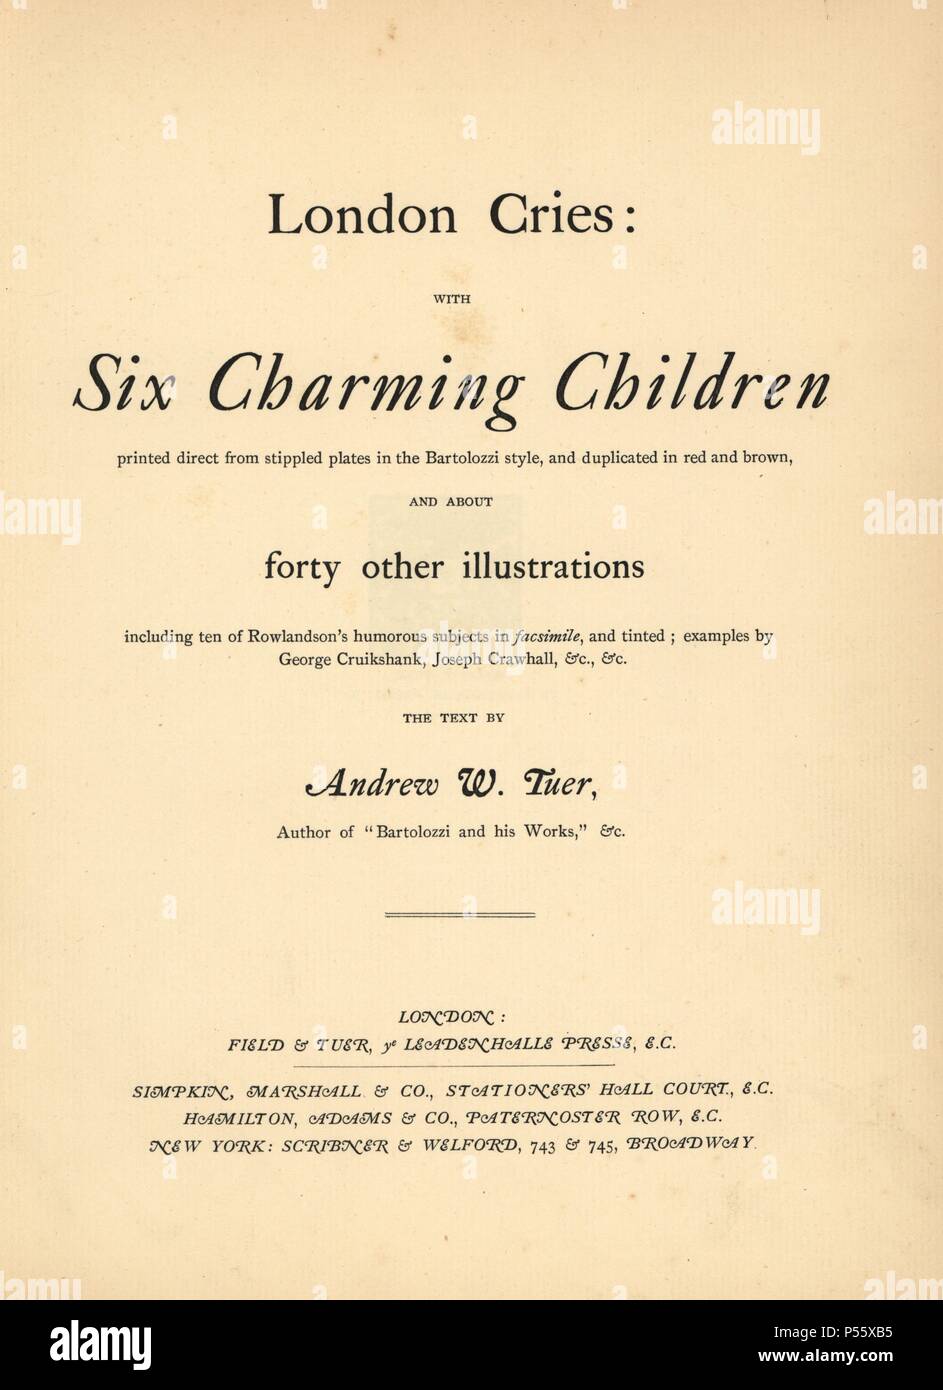 Title page to Andrew Tuer's 'London Cries: with Six Charming Children and about forty other illustrations,' published by Field & Tuer, London, 1883. Stock Photo